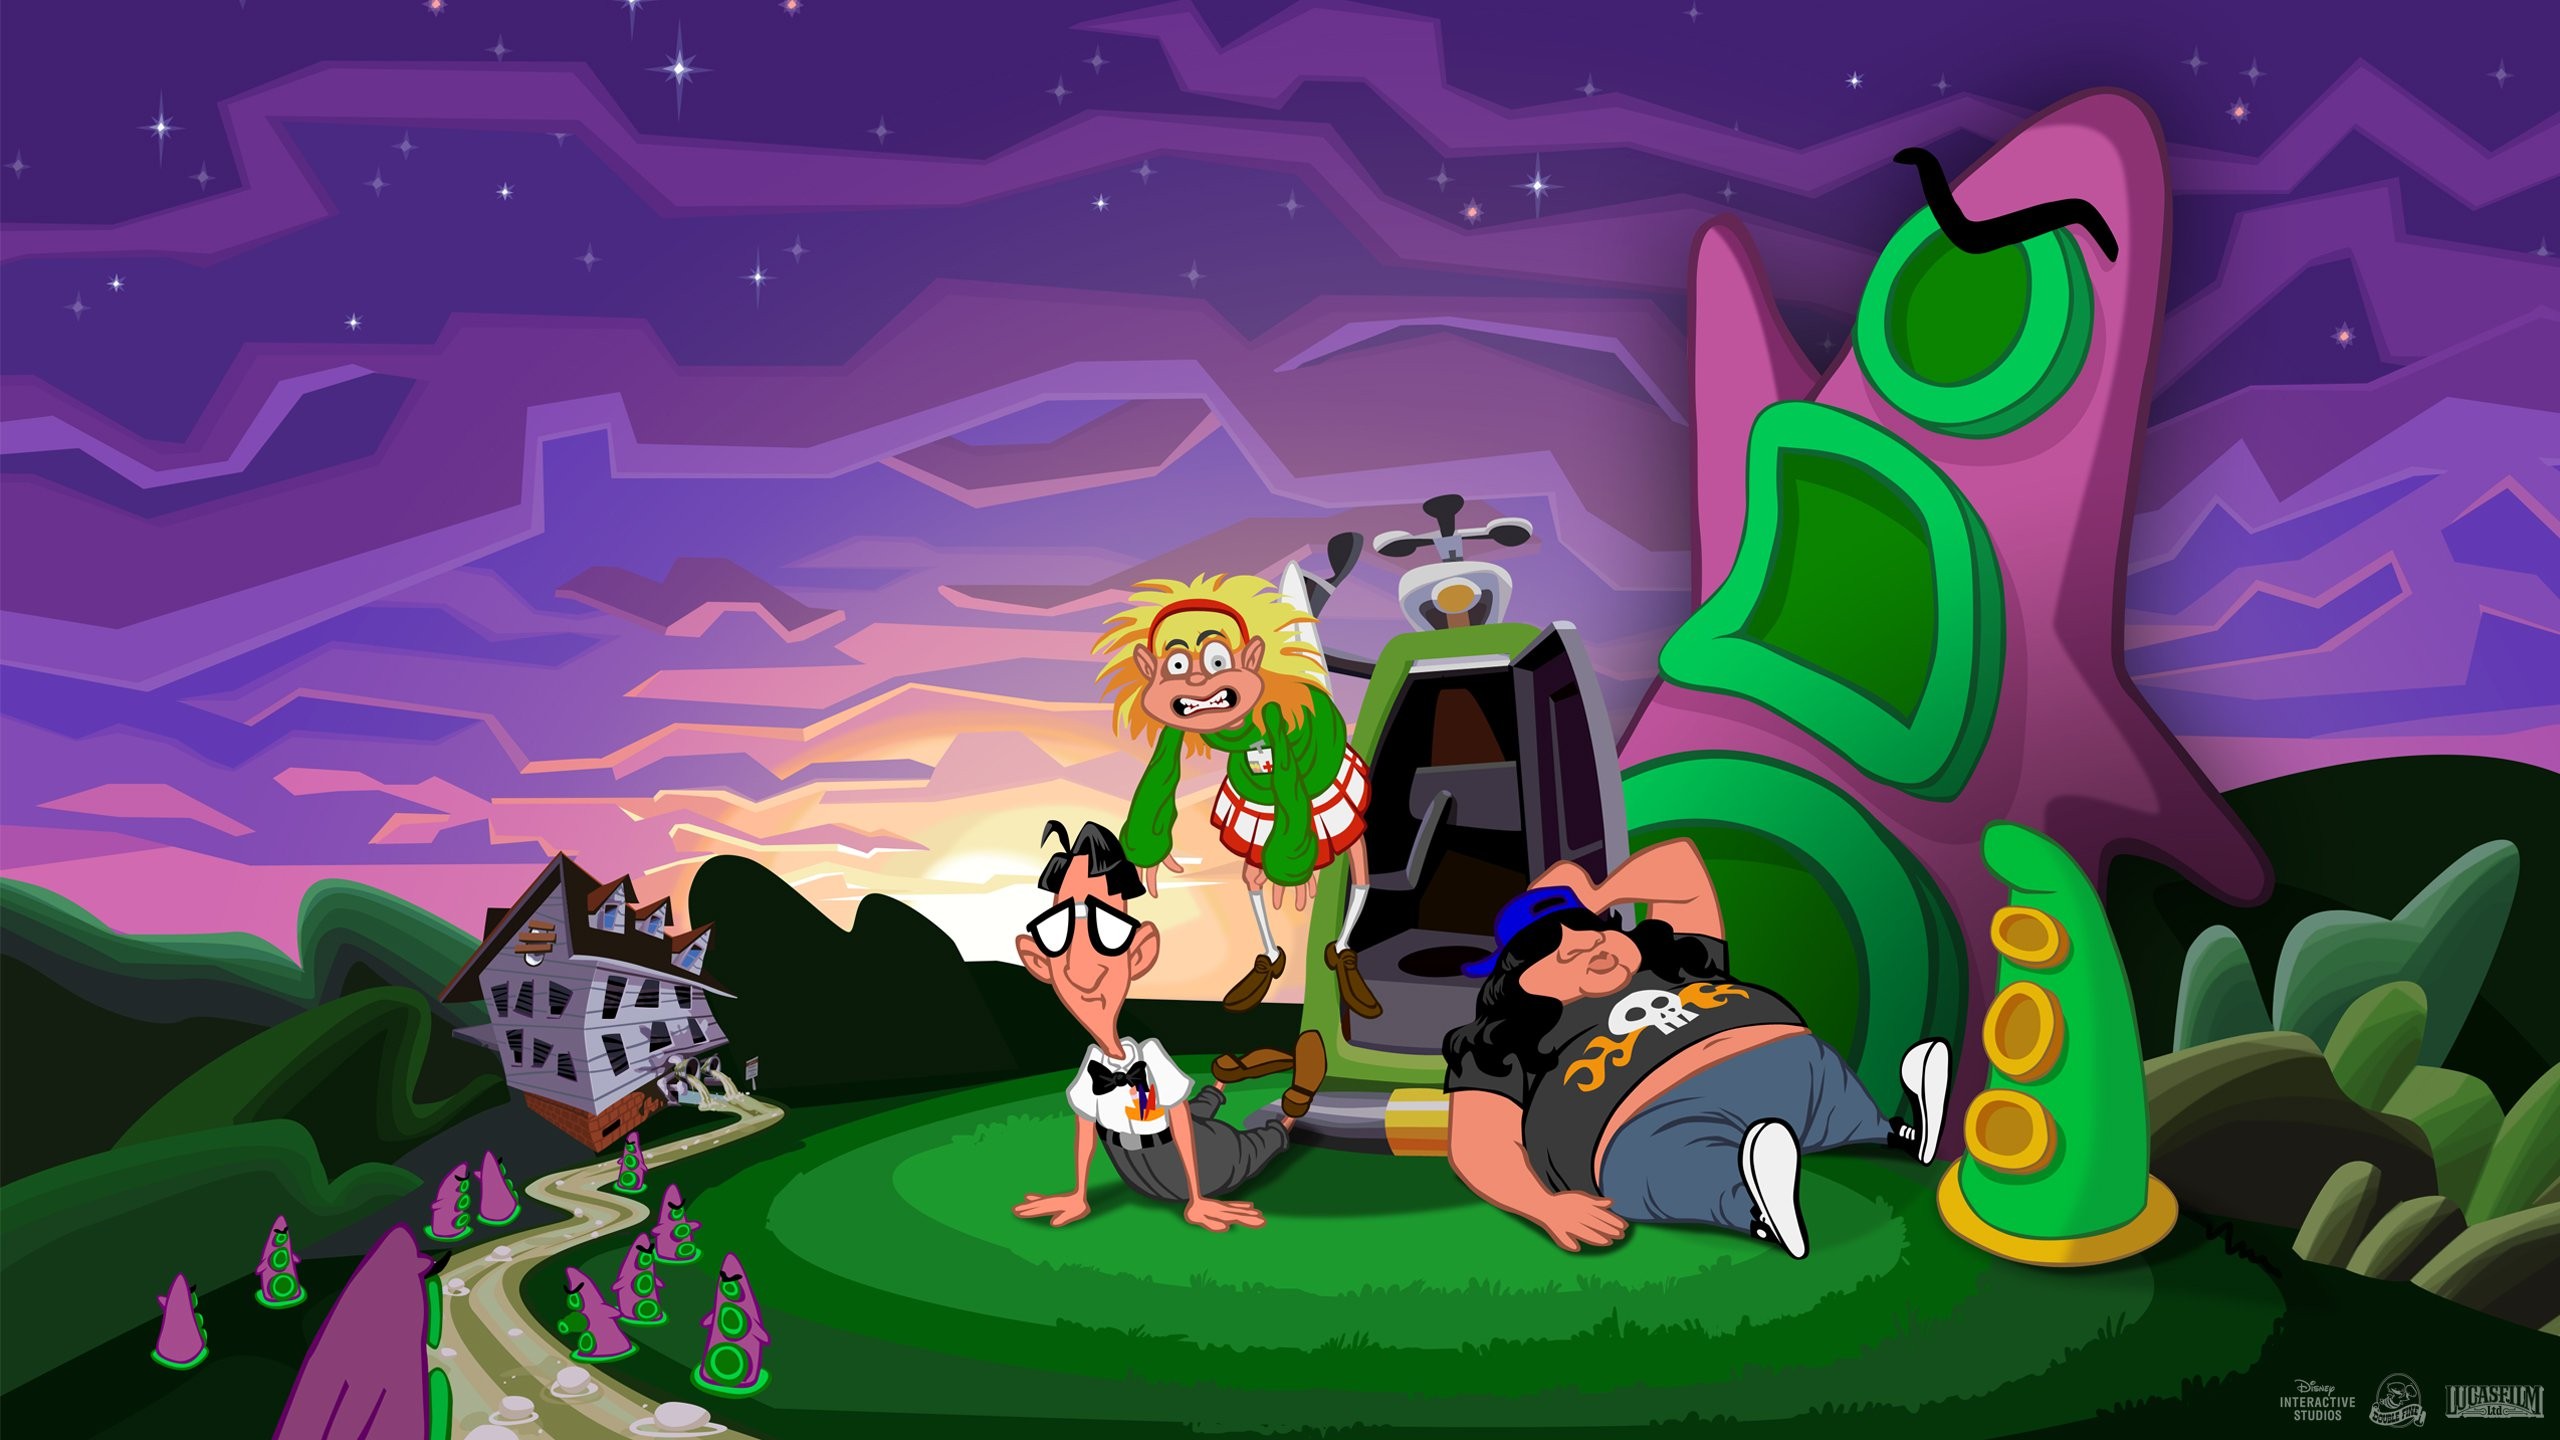 Day Of The Tentacle Video Games Retro Games LucasArts Tentacles Humor PC Gaming Video Game Art 2560x1440